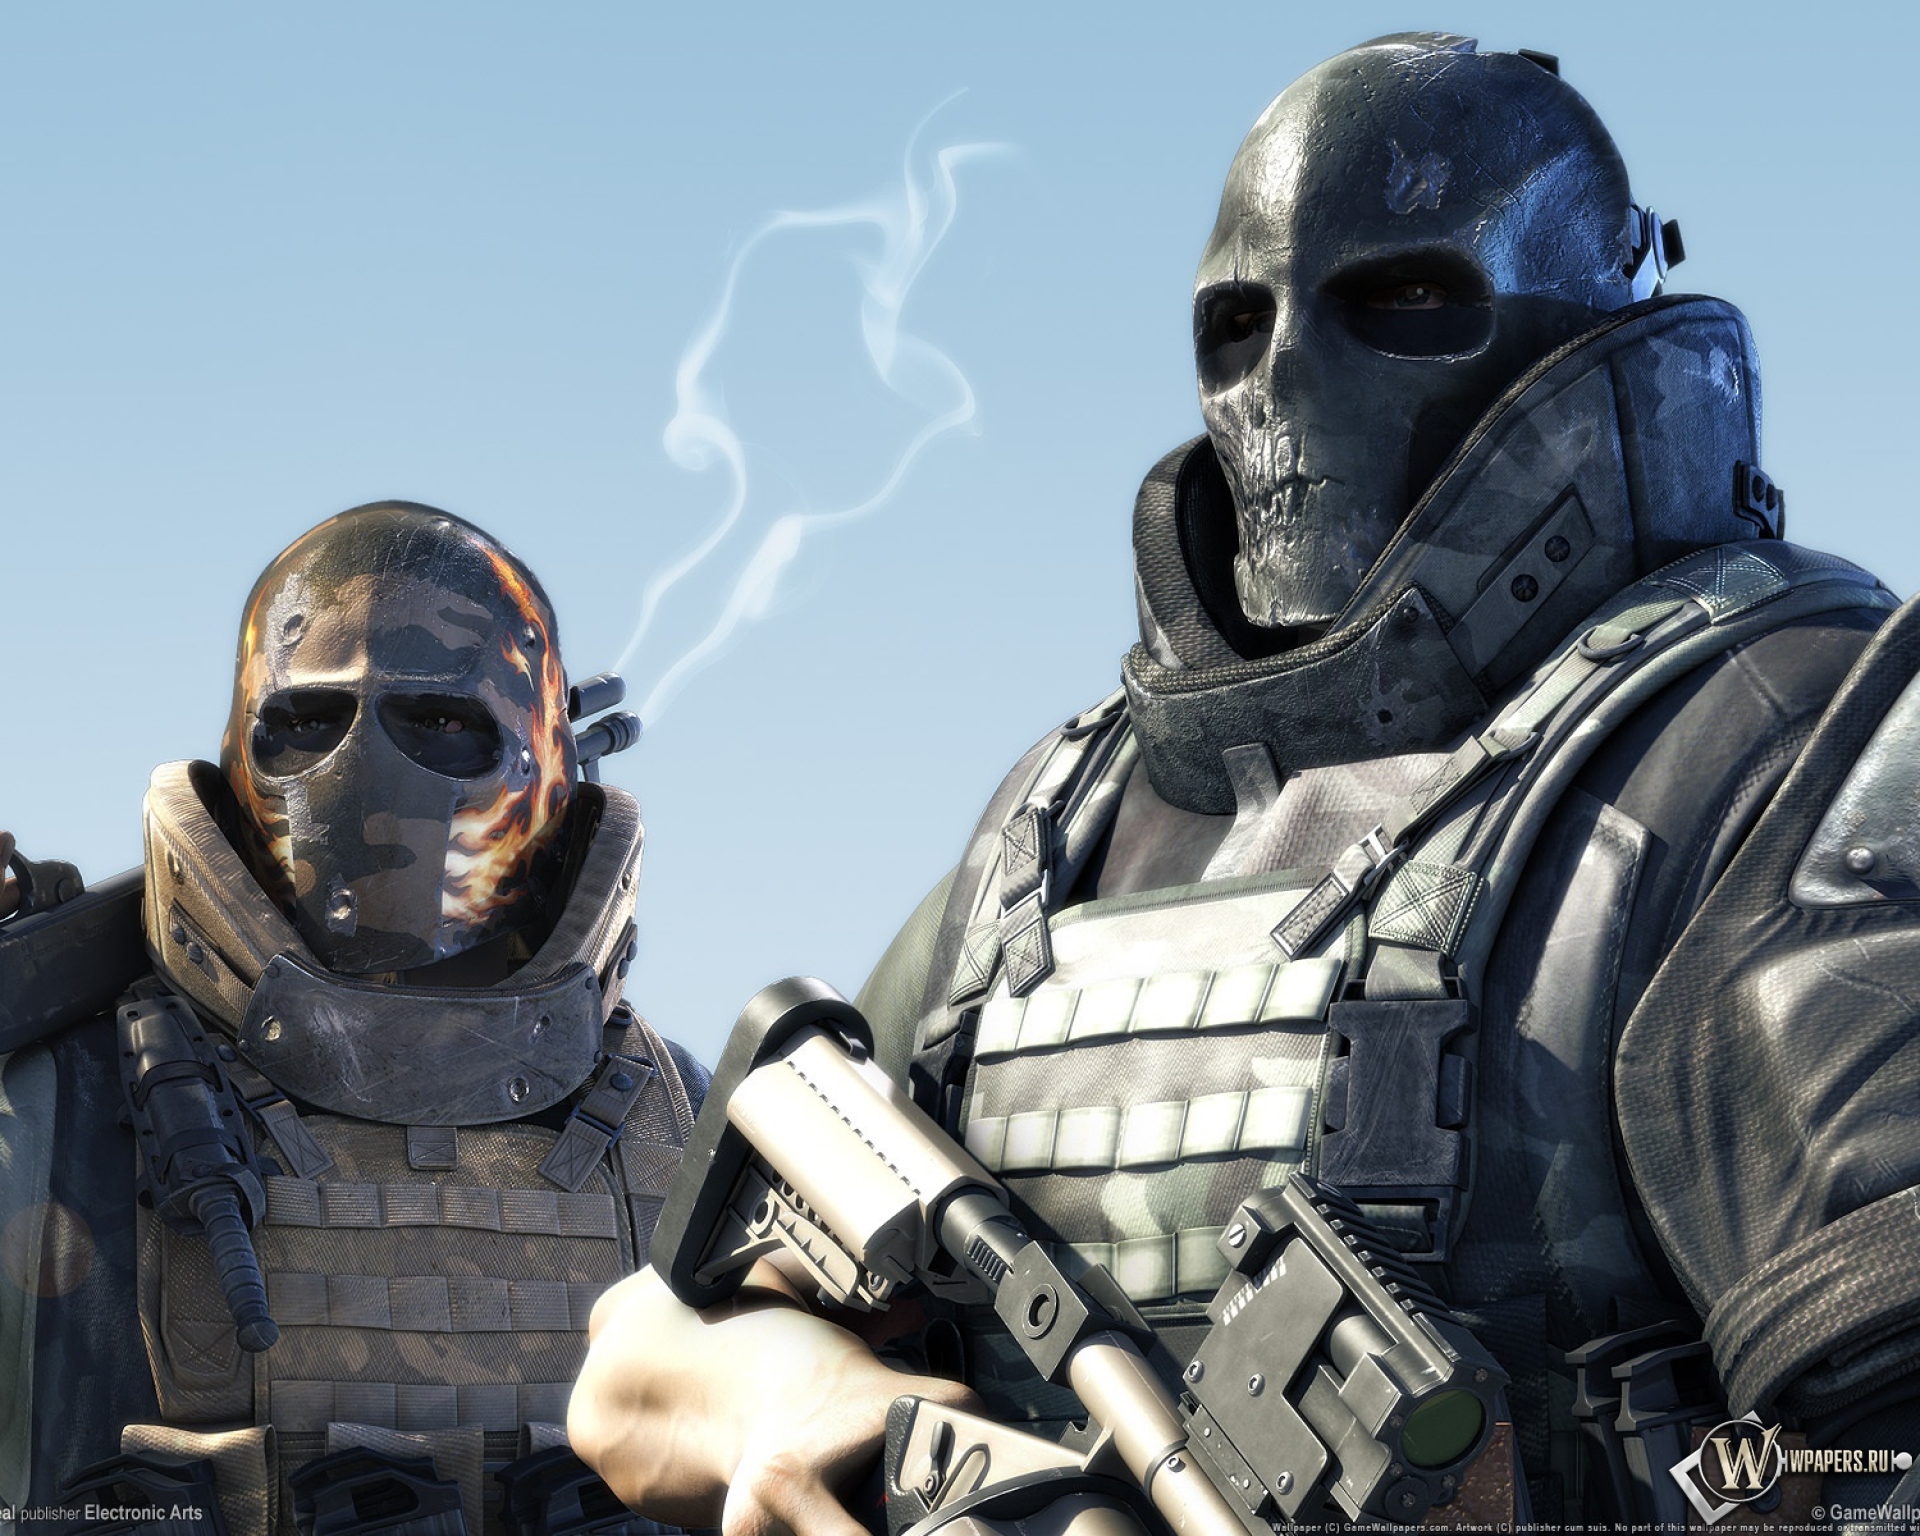 Army of Two 1920x1536